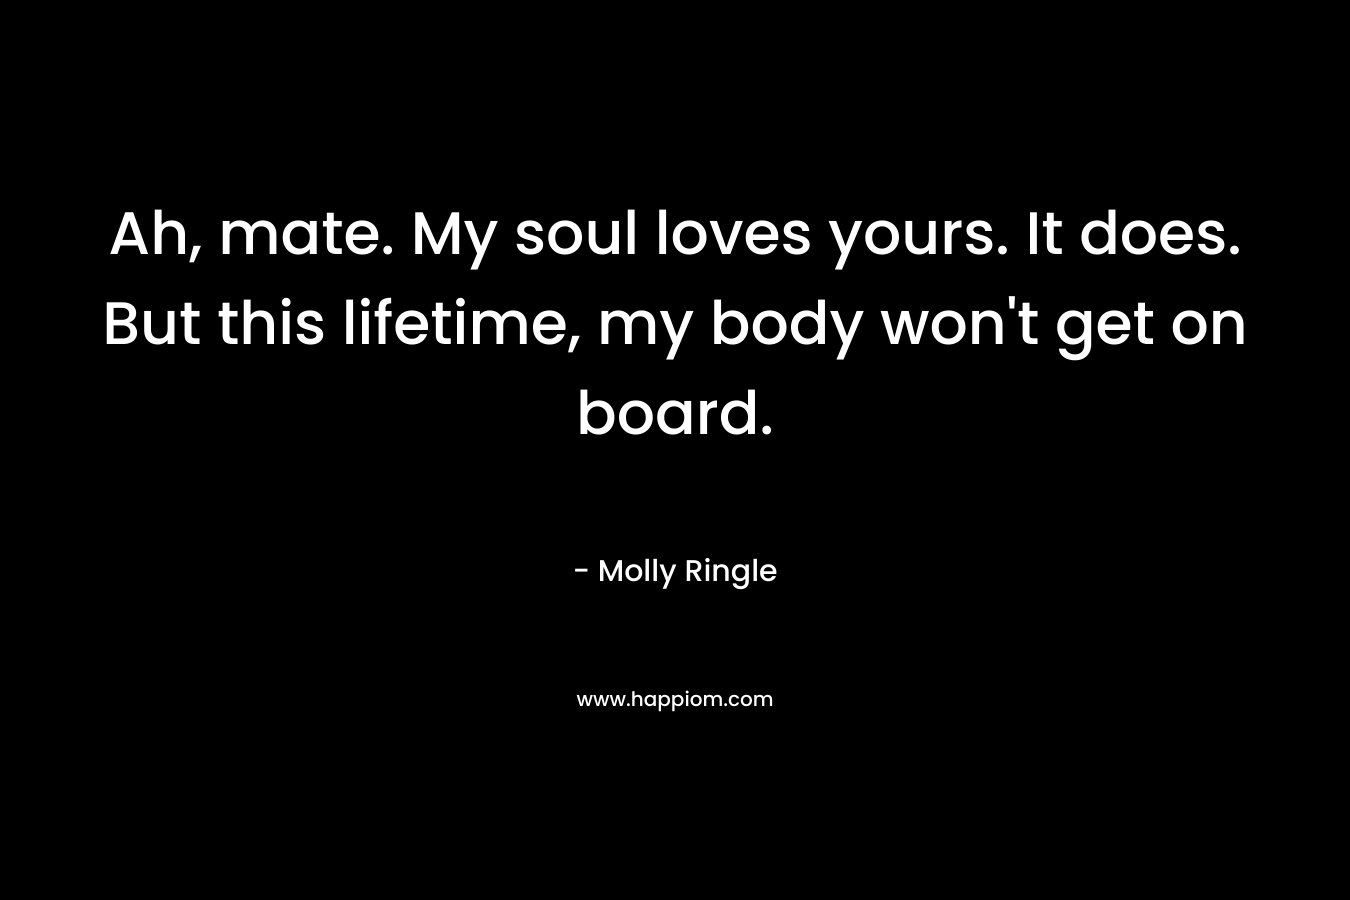 Ah, mate. My soul loves yours. It does. But this lifetime, my body won’t get on board. – Molly Ringle